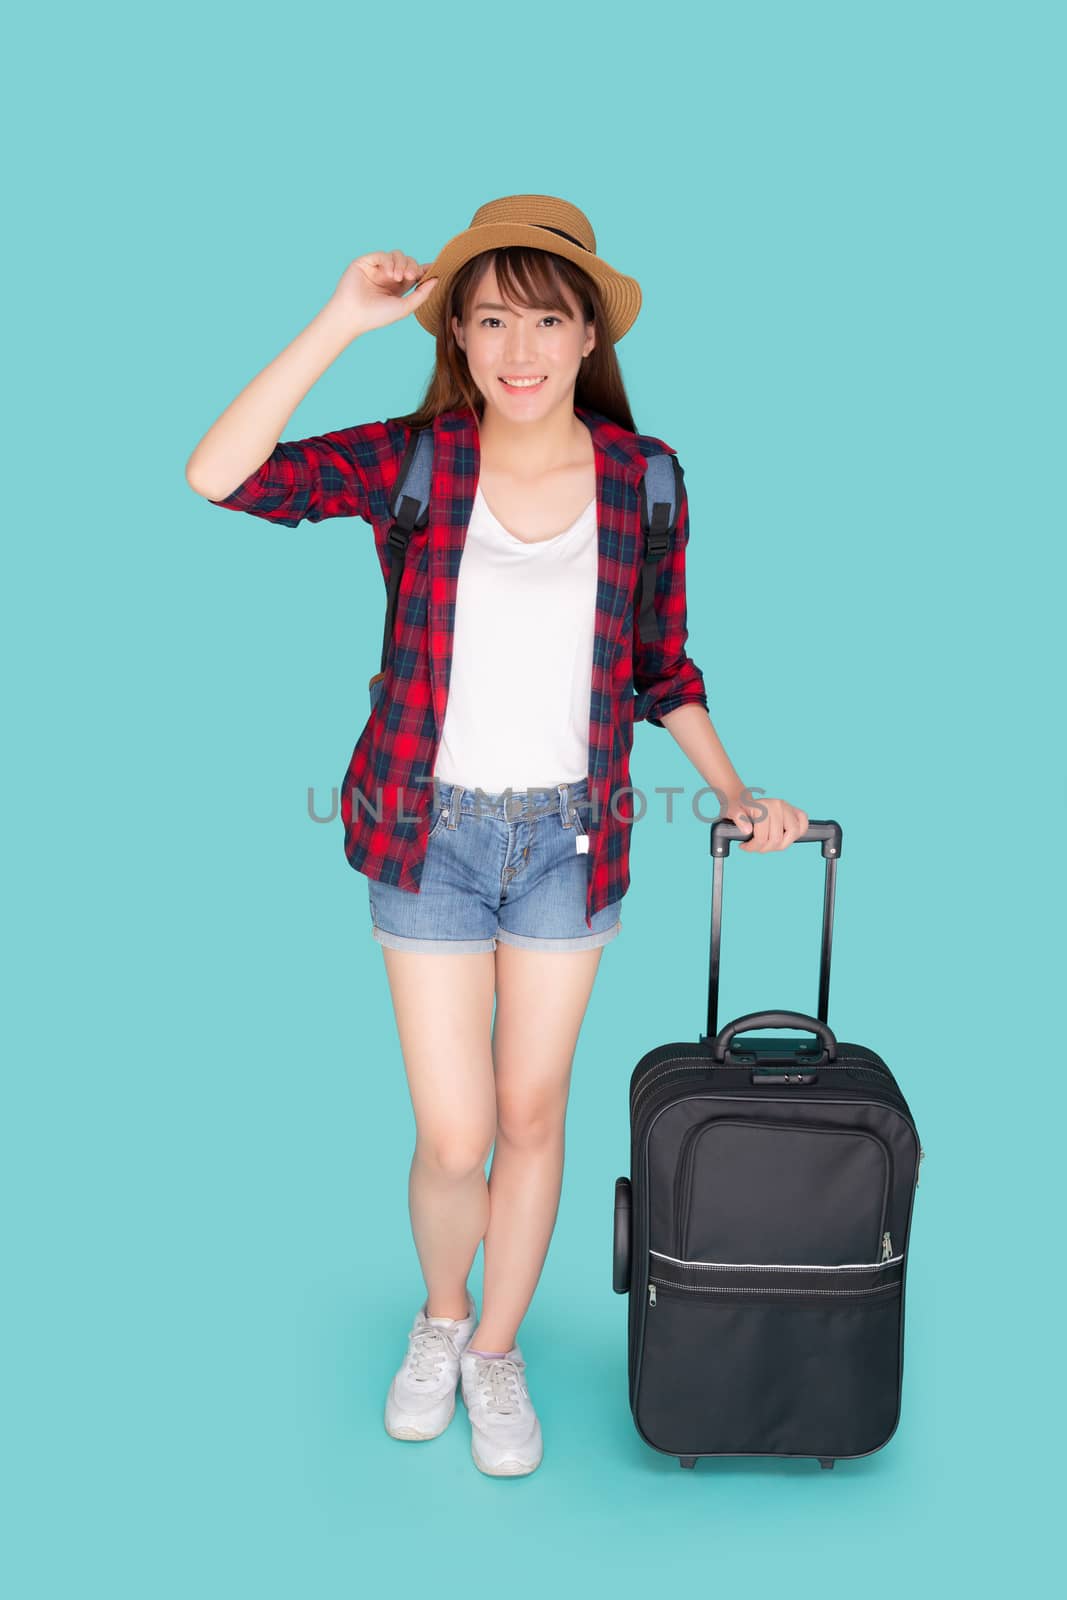 Beautiful young asian woman pulling suitcase isolated on blue background, asia girl having expression is cheerful holding luggage walking in vacation with excited, journey and travel concept.